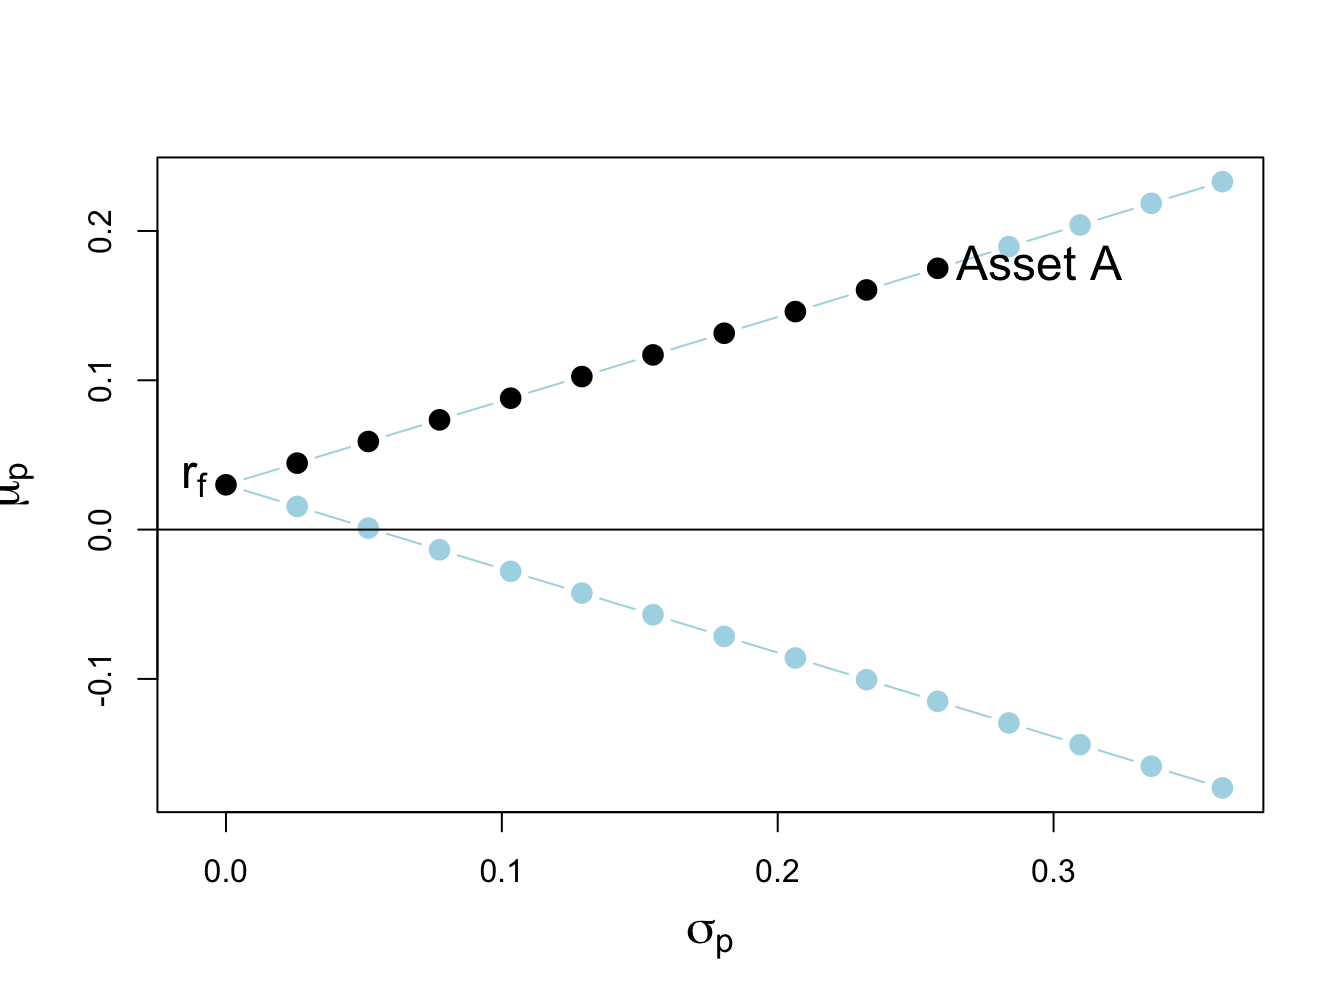 Return-risk characteristics of portfolios of asset A and a risk-free asset with $r_{f}=0.03$. Long-only portfolios are in black (between $\mathrm{r}_{f}$ and Asset A), and long-short portfolios are in blue (below $\mathrm{r}_{f}$ and above Asset A).